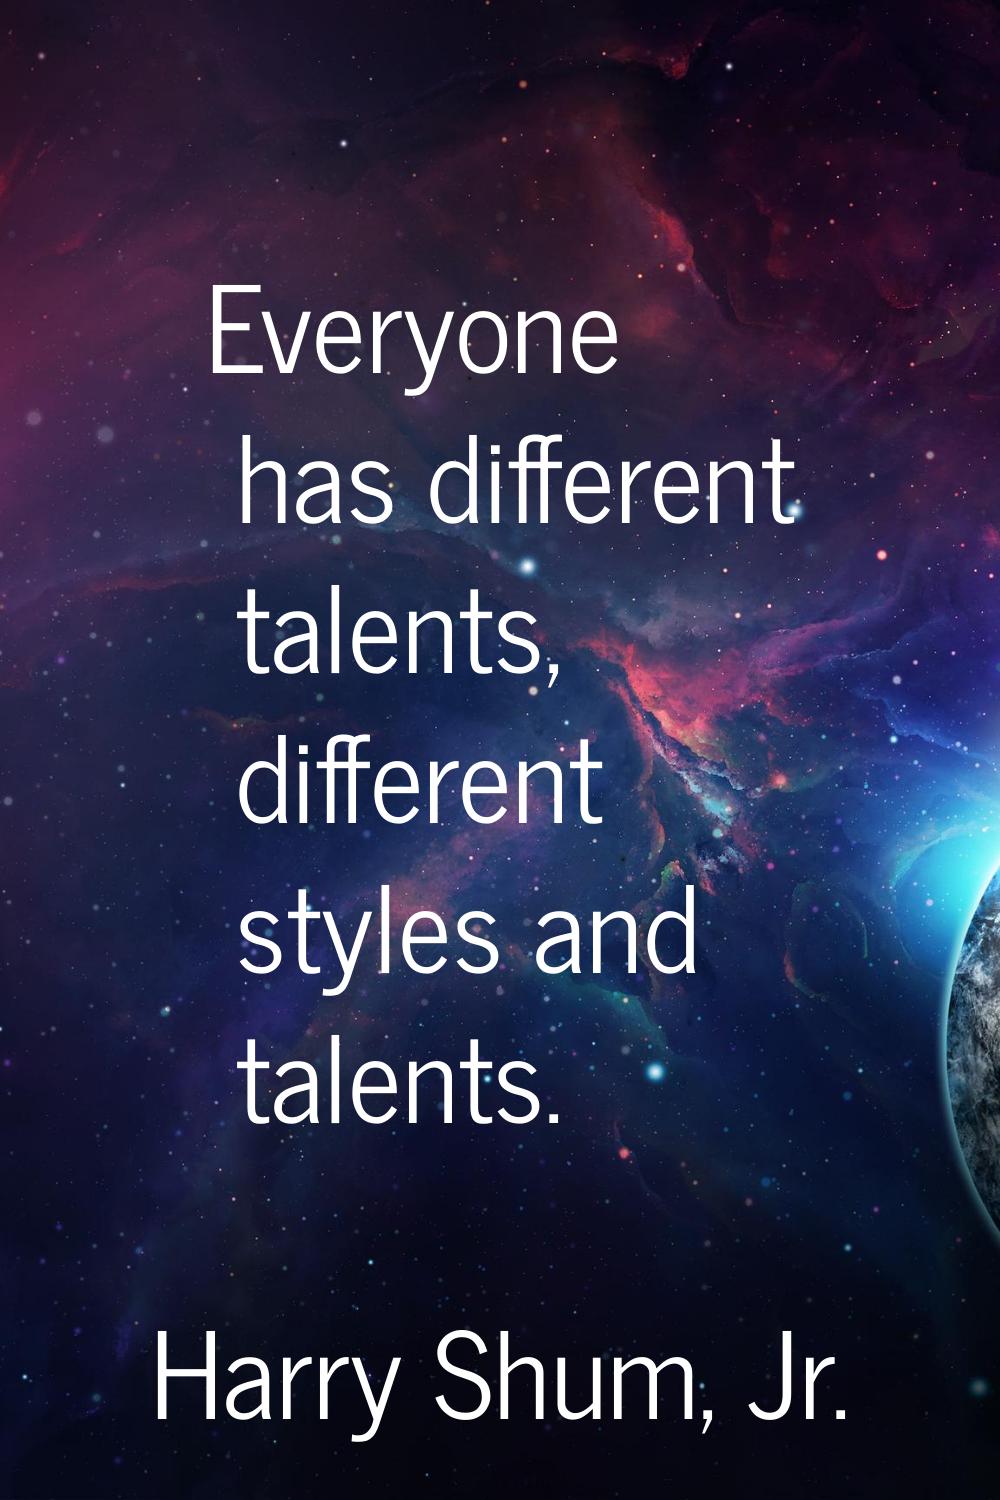 Everyone has different talents, different styles and talents.